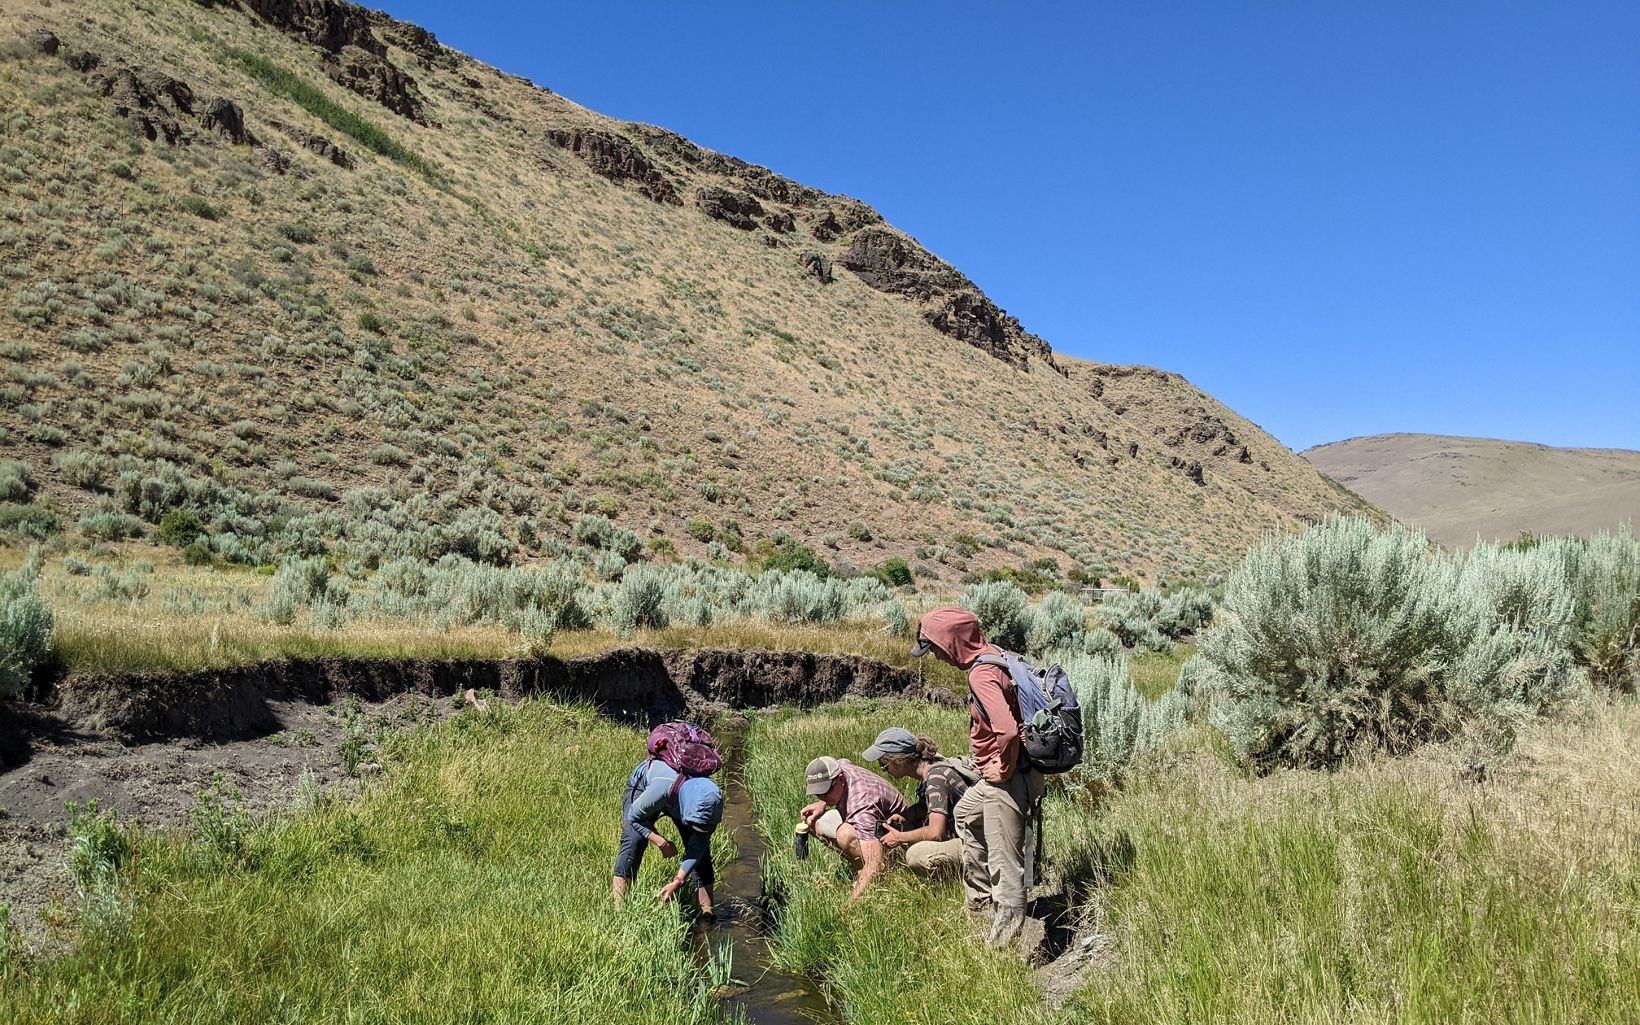 Scientists studying a spring-fed stream in a grassy meadow with an arid mountainside in the background.